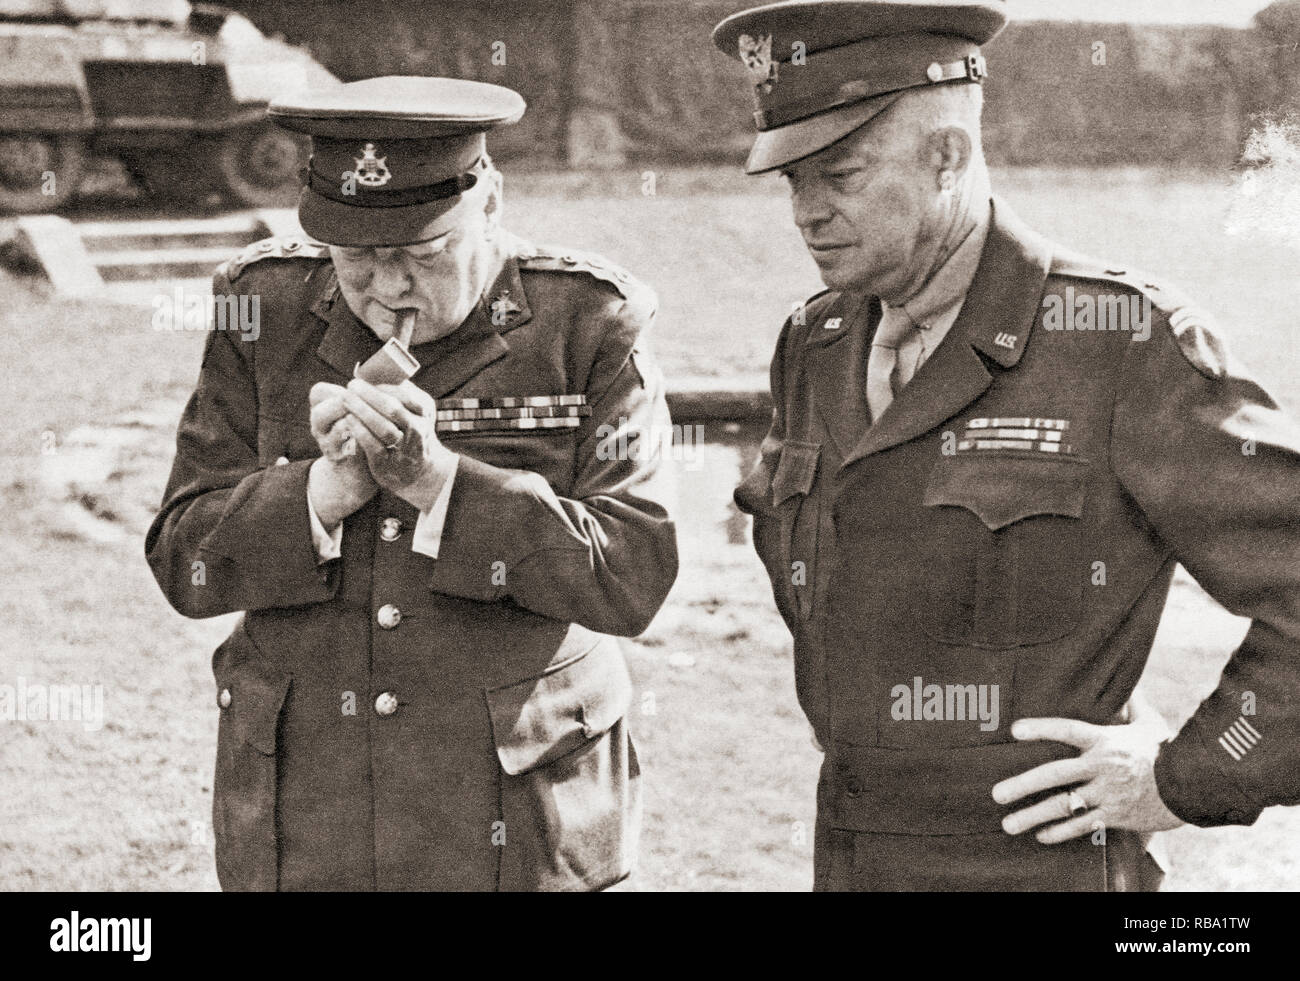 Winston Churchill, left, with General Eisenhower. Dwight David 'Ike' Eisenhower, 1890 – 1969. American army general, statesman and 34th president of the United States of America.  Sir Winston Leonard Spencer-Churchill, 1874 –1965. British politician, statesman, army officer, and writer, who was Prime Minister of the United Kingdom from 1940 to 1945 and again from 1951 to 1955. Stock Photo